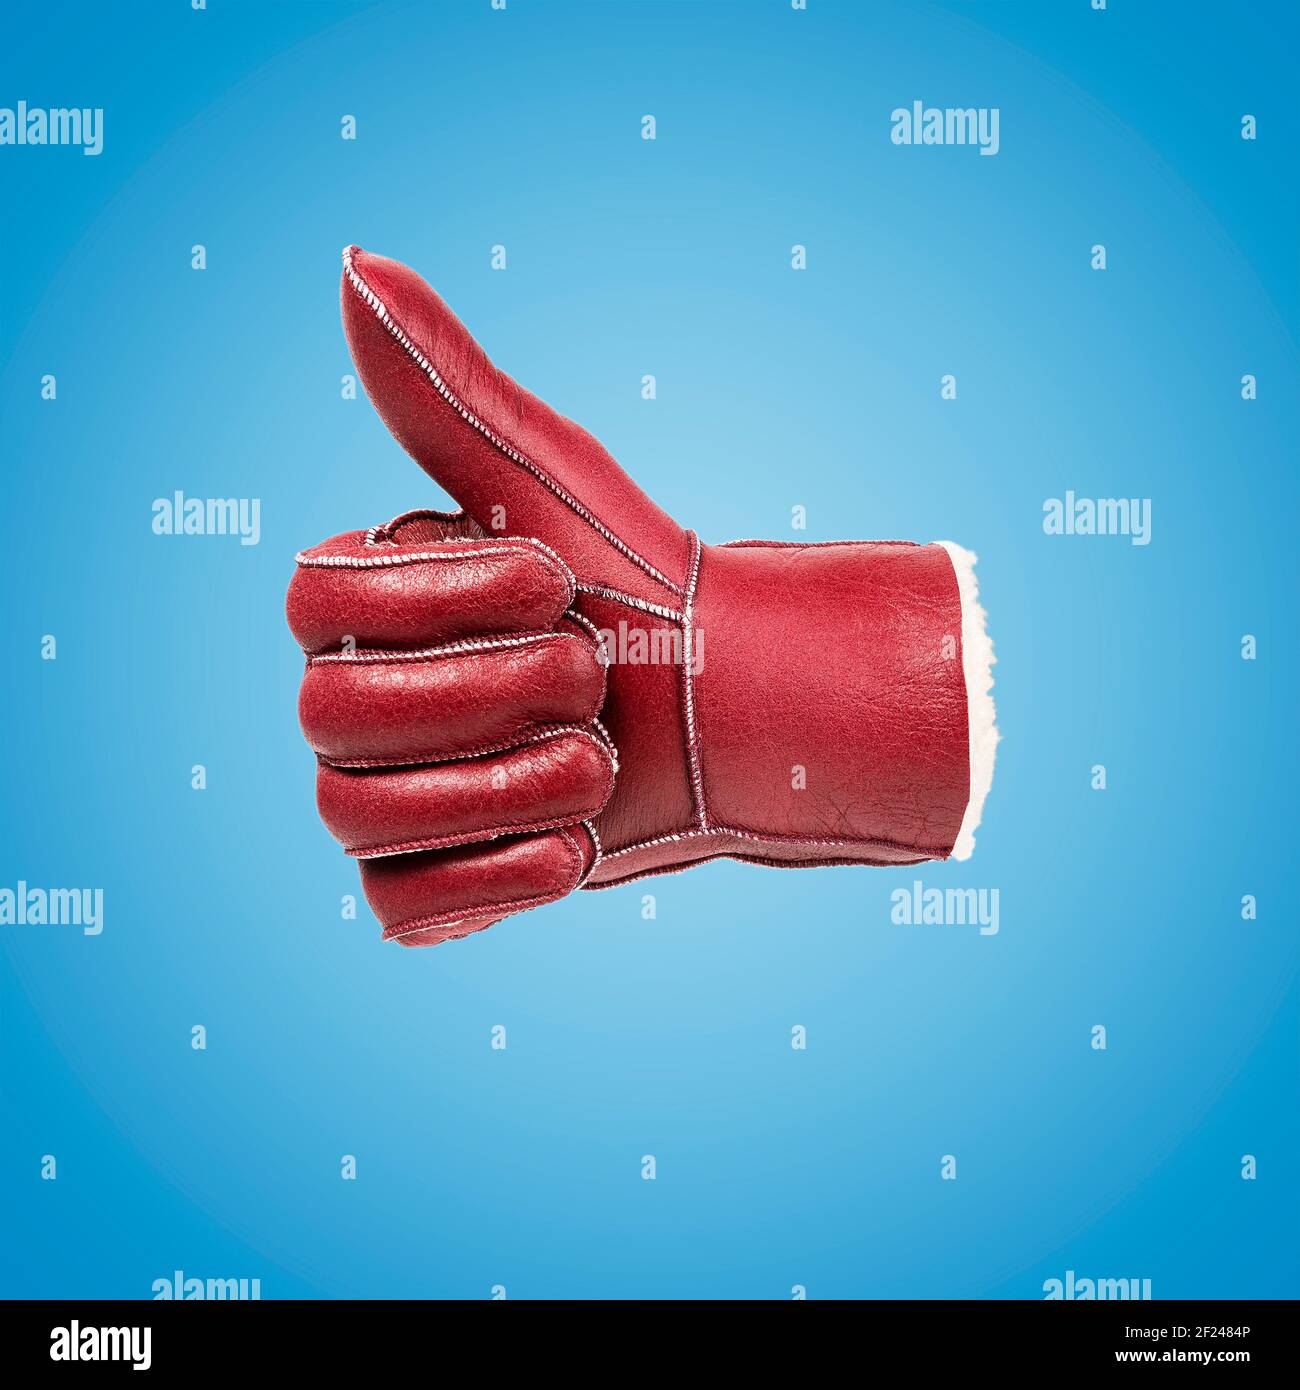 Gesturing red leather glove on blue background. Minimal art fashion concept. Stock Photo